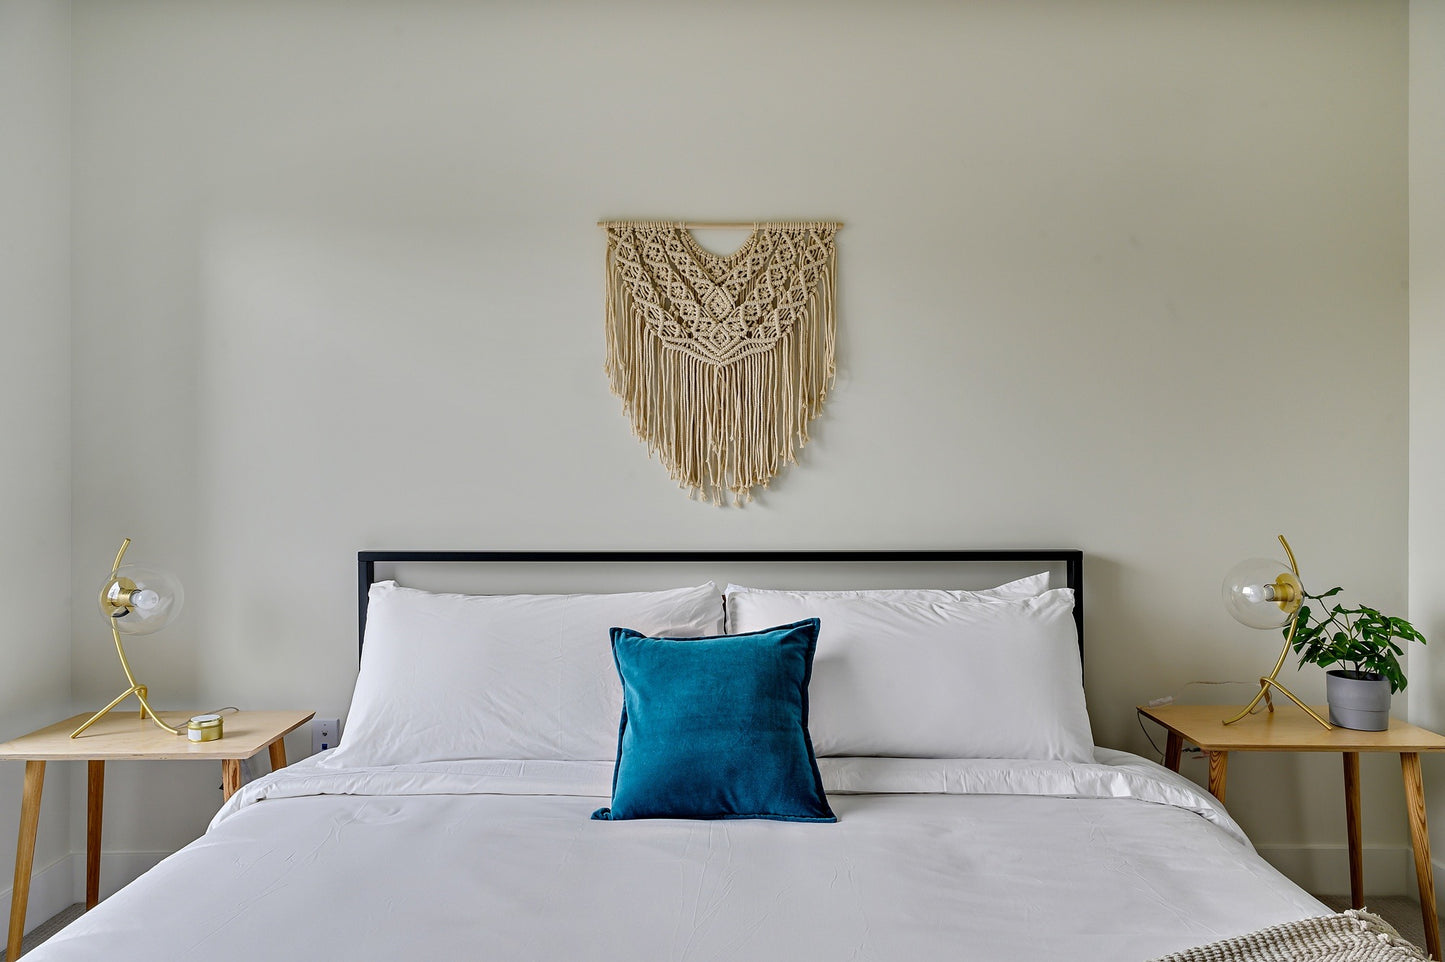 This large scale macrame wall hanging is perfect addition to your home. Hang over your bed, in the living room, entry way or any interior wall space in need of a statement and texture. 